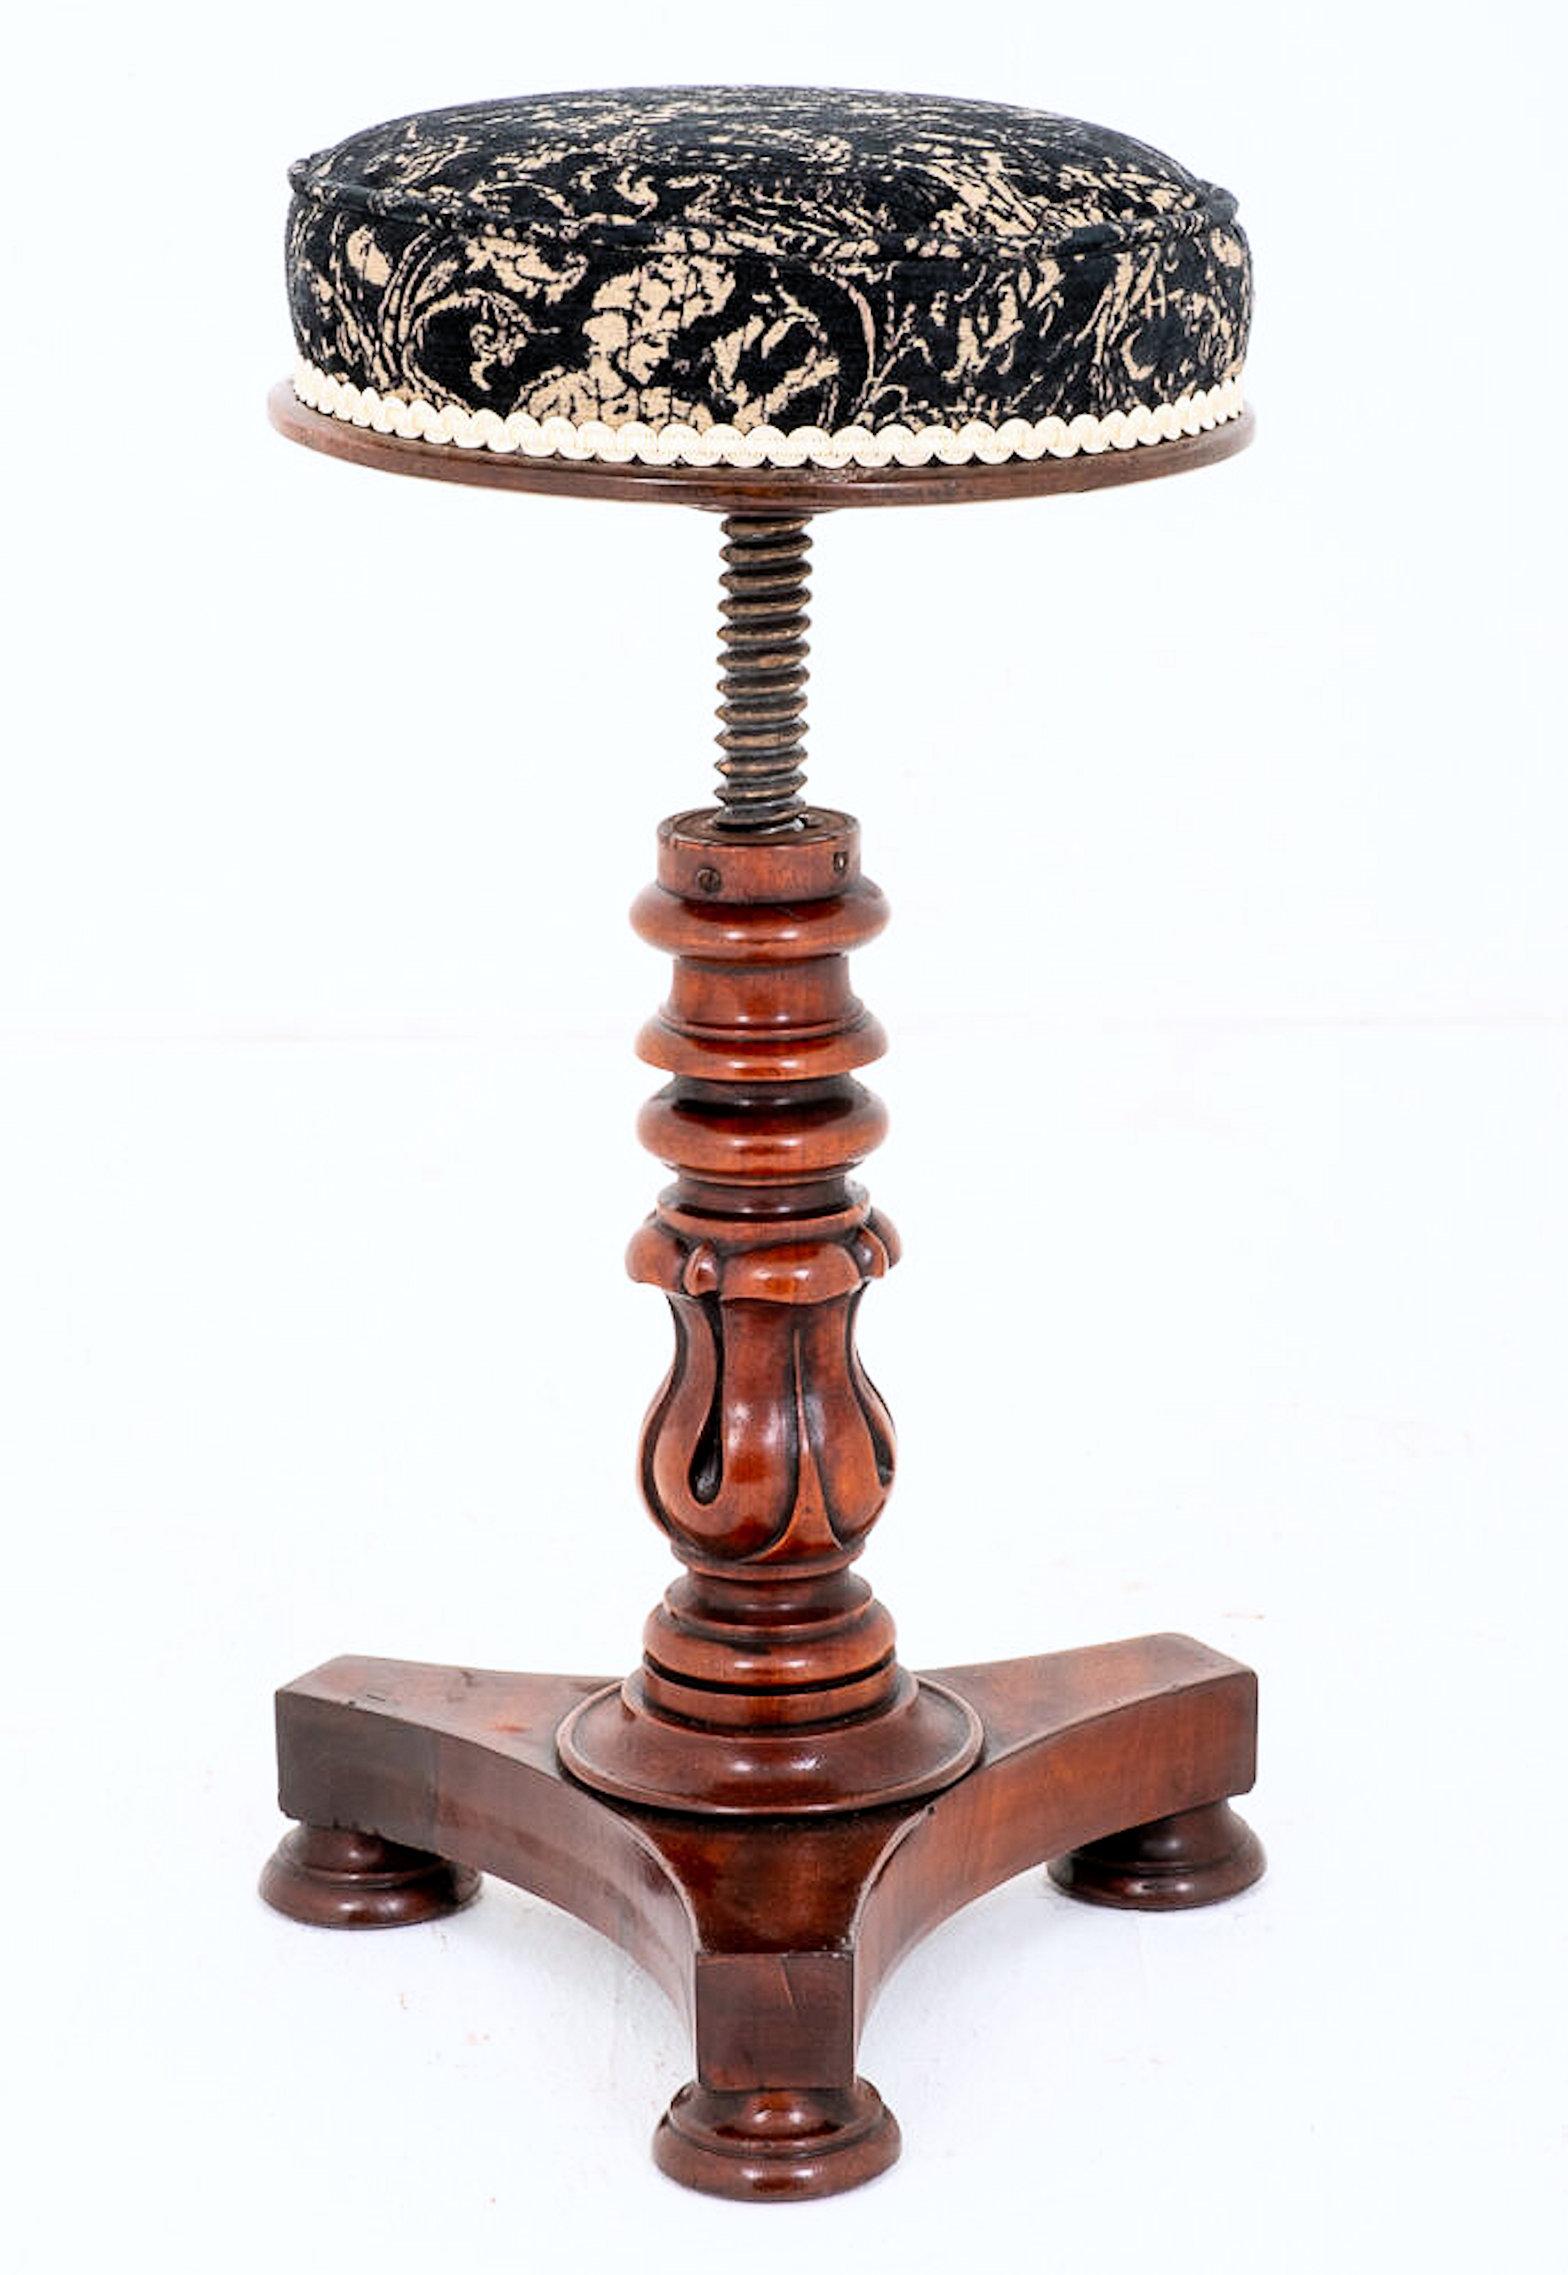 This very handsome and beautifully carved mahogany piano stool features an adjustable seat supported on a tulip shaped central column on a triangular shaped base ending with 3 bun feet. The stool measures 21 in – 53.4 cm extending to a maximum